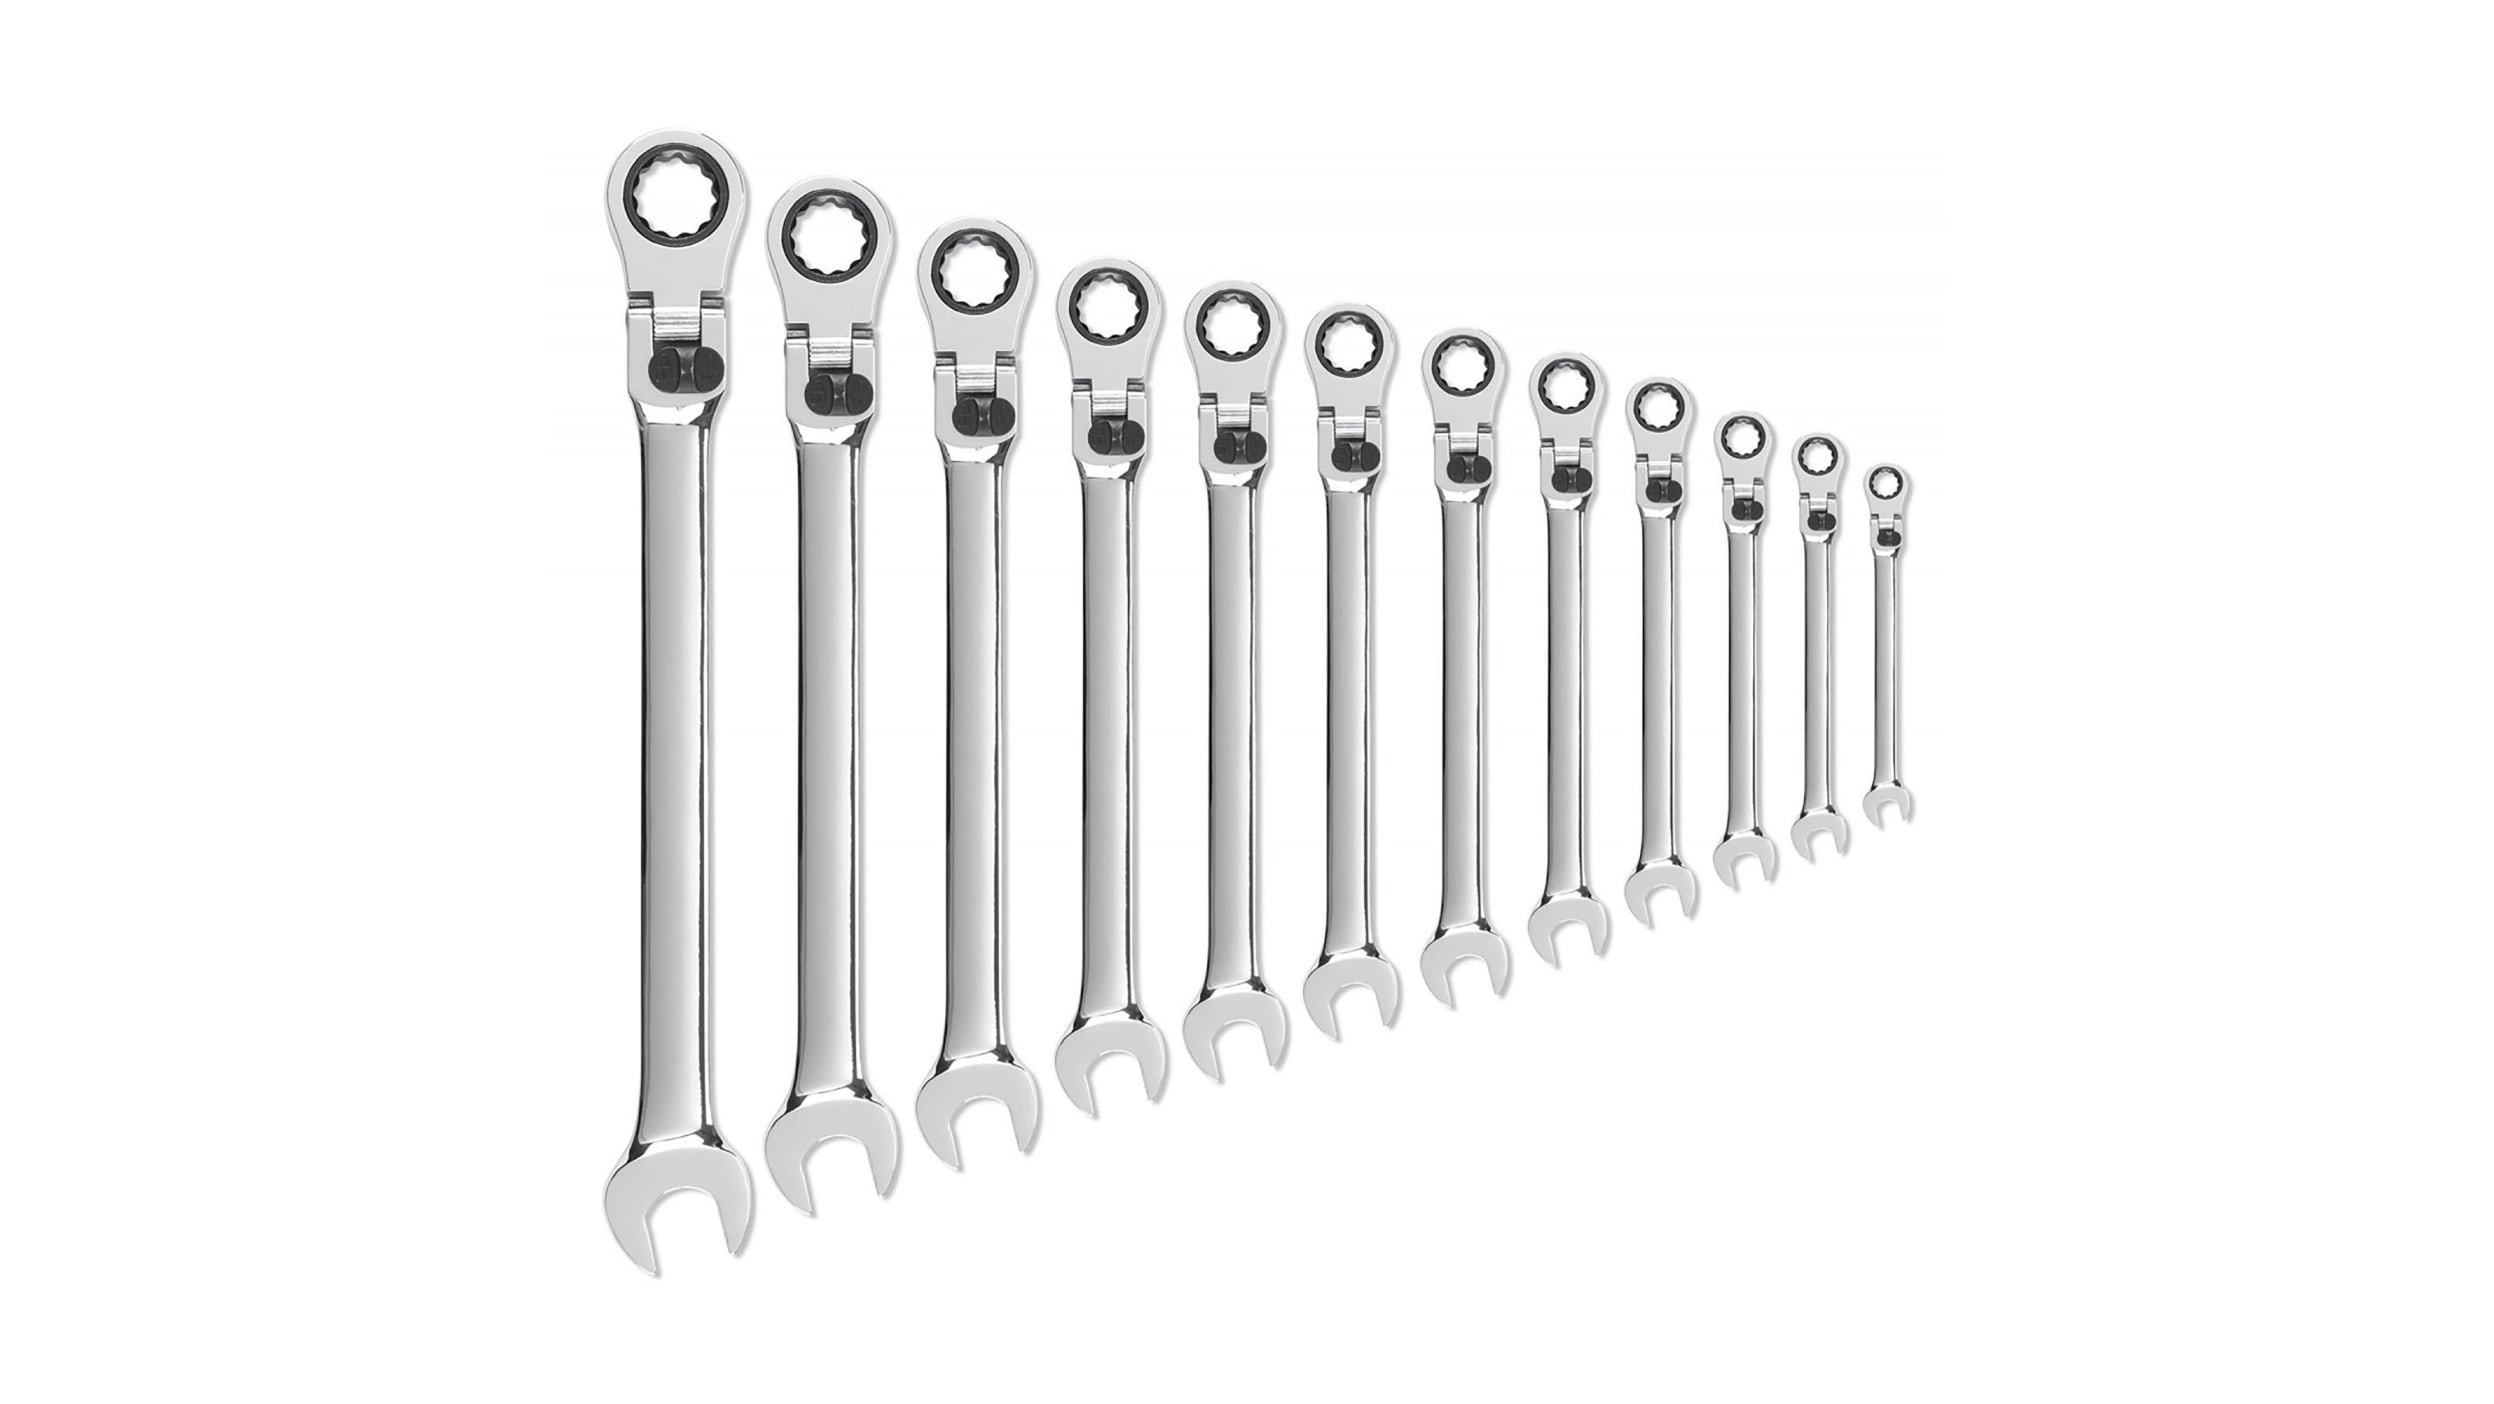 GEARWRENCH クスラチェットレンチ 10,12,13,14,15mm 【正規品直輸入